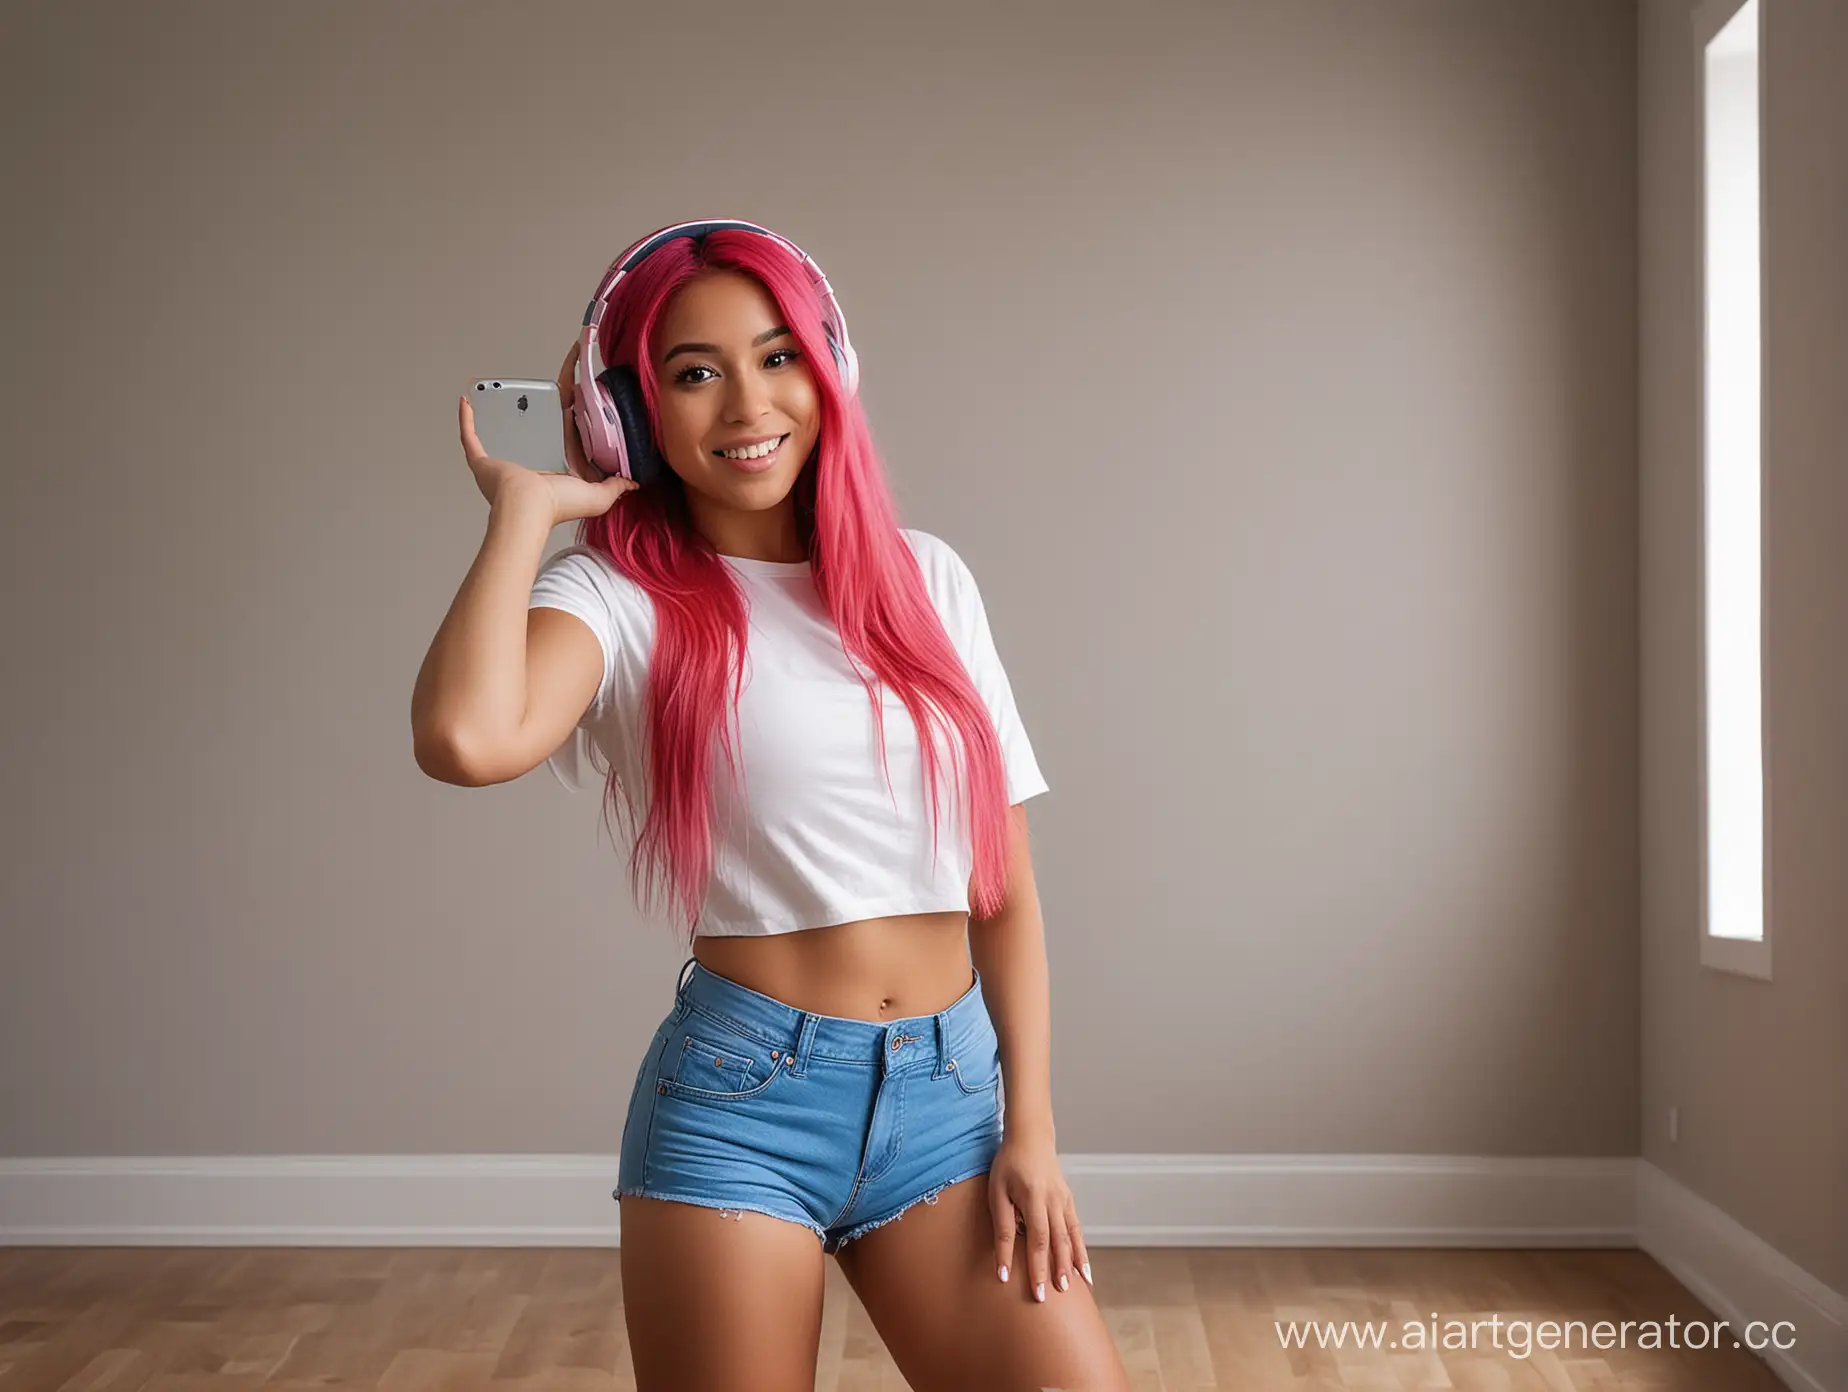 Capturing a full-body, full-length shot of a 30 y.o. latina woman with extremely bright pink straight hair is posing for a selfie. Her face is directed towards the camera, but it's obscured by the phone they're using to take the photo. Her body is slightly turned to their left side, showcasing a profile view of her right side. Her right arm is extended forward, holding the phone in front of her face with both hands. The left hand supports the bottom of the phone while fingers from both hands are visible on its sides. She's wearing a pair of blue headphones that rest atop of her head, covering part of her long hair that flows down past hair waist. She is dressed in a short-sleeved grey top and blue shorts. Her left hand rests on her hip while she bends at the waist slightly to accentuate this pose.
The background is relatively plain and unadorned – it appears to be an indoor setting with walls painted in a light color and a floor that matches it in tone. 
Dramatic lighting ((((seems like the room is lit by a nice warmth candle light)))), intense and immersive atmosphere, dark, earthy tones, cinematic, epic realism, 8K, highly detailed.
